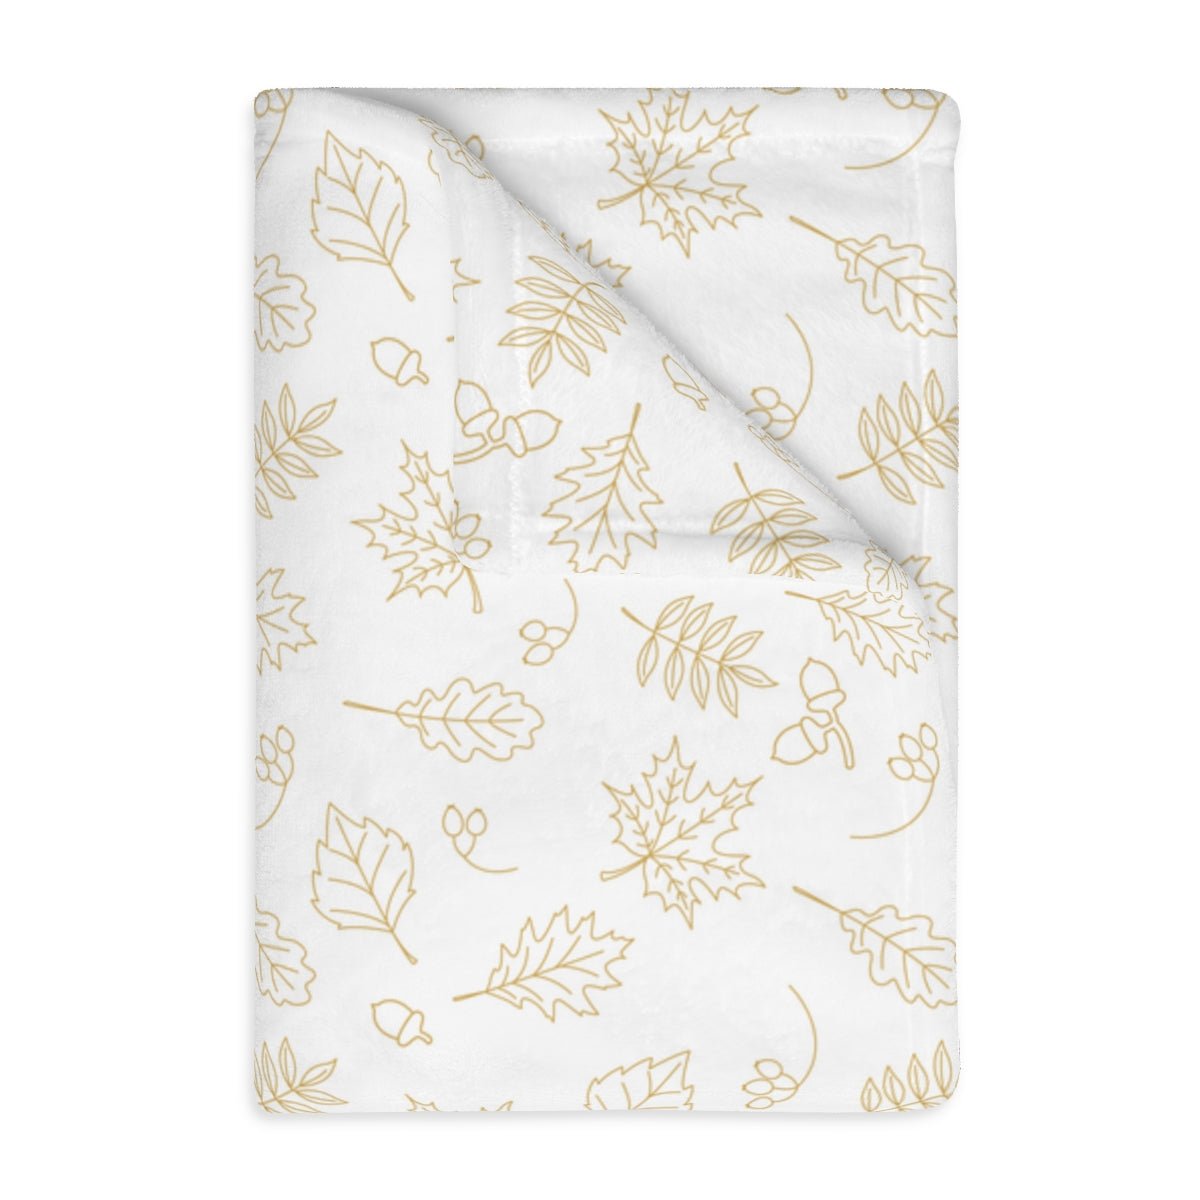 Acorns and Leaves Velveteen Minky Blanket (Two-sided print) - Puffin Lime